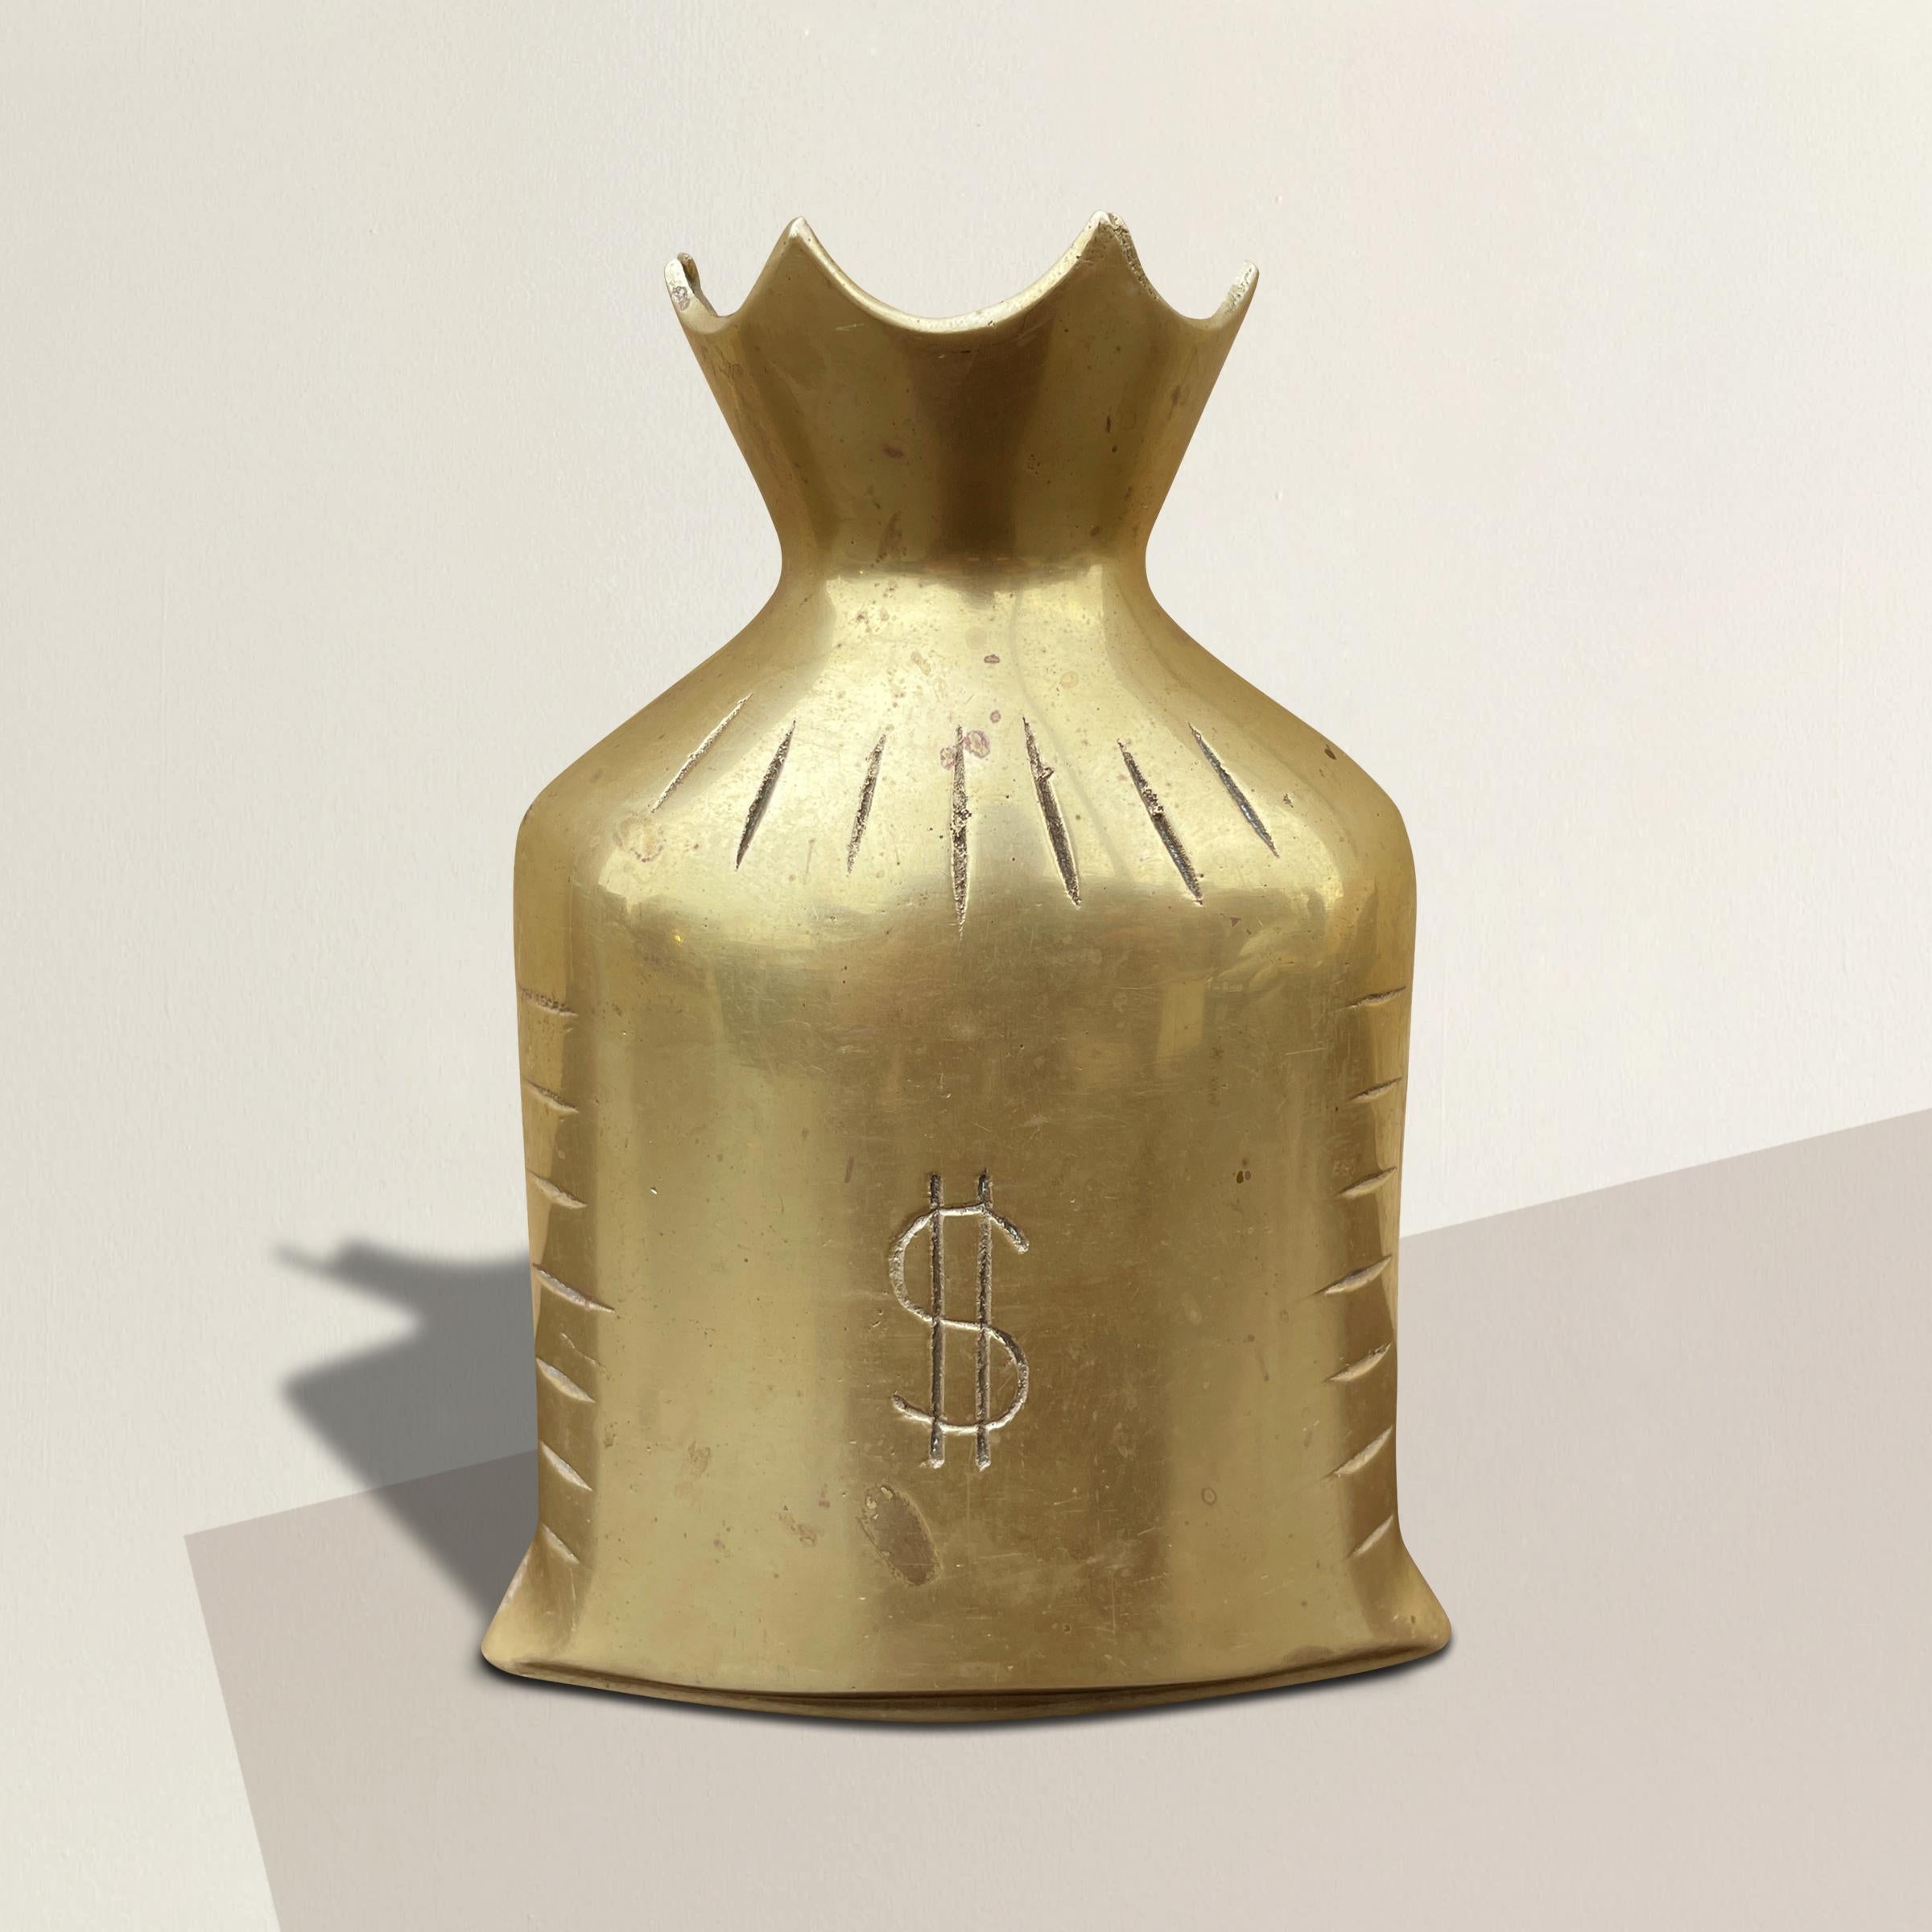 A vintage brass coin bank in the form of a money bag with a large dollar sign on both sides. Coins are inserted in the top, and can be easily removed by turning the bad over and shaking.